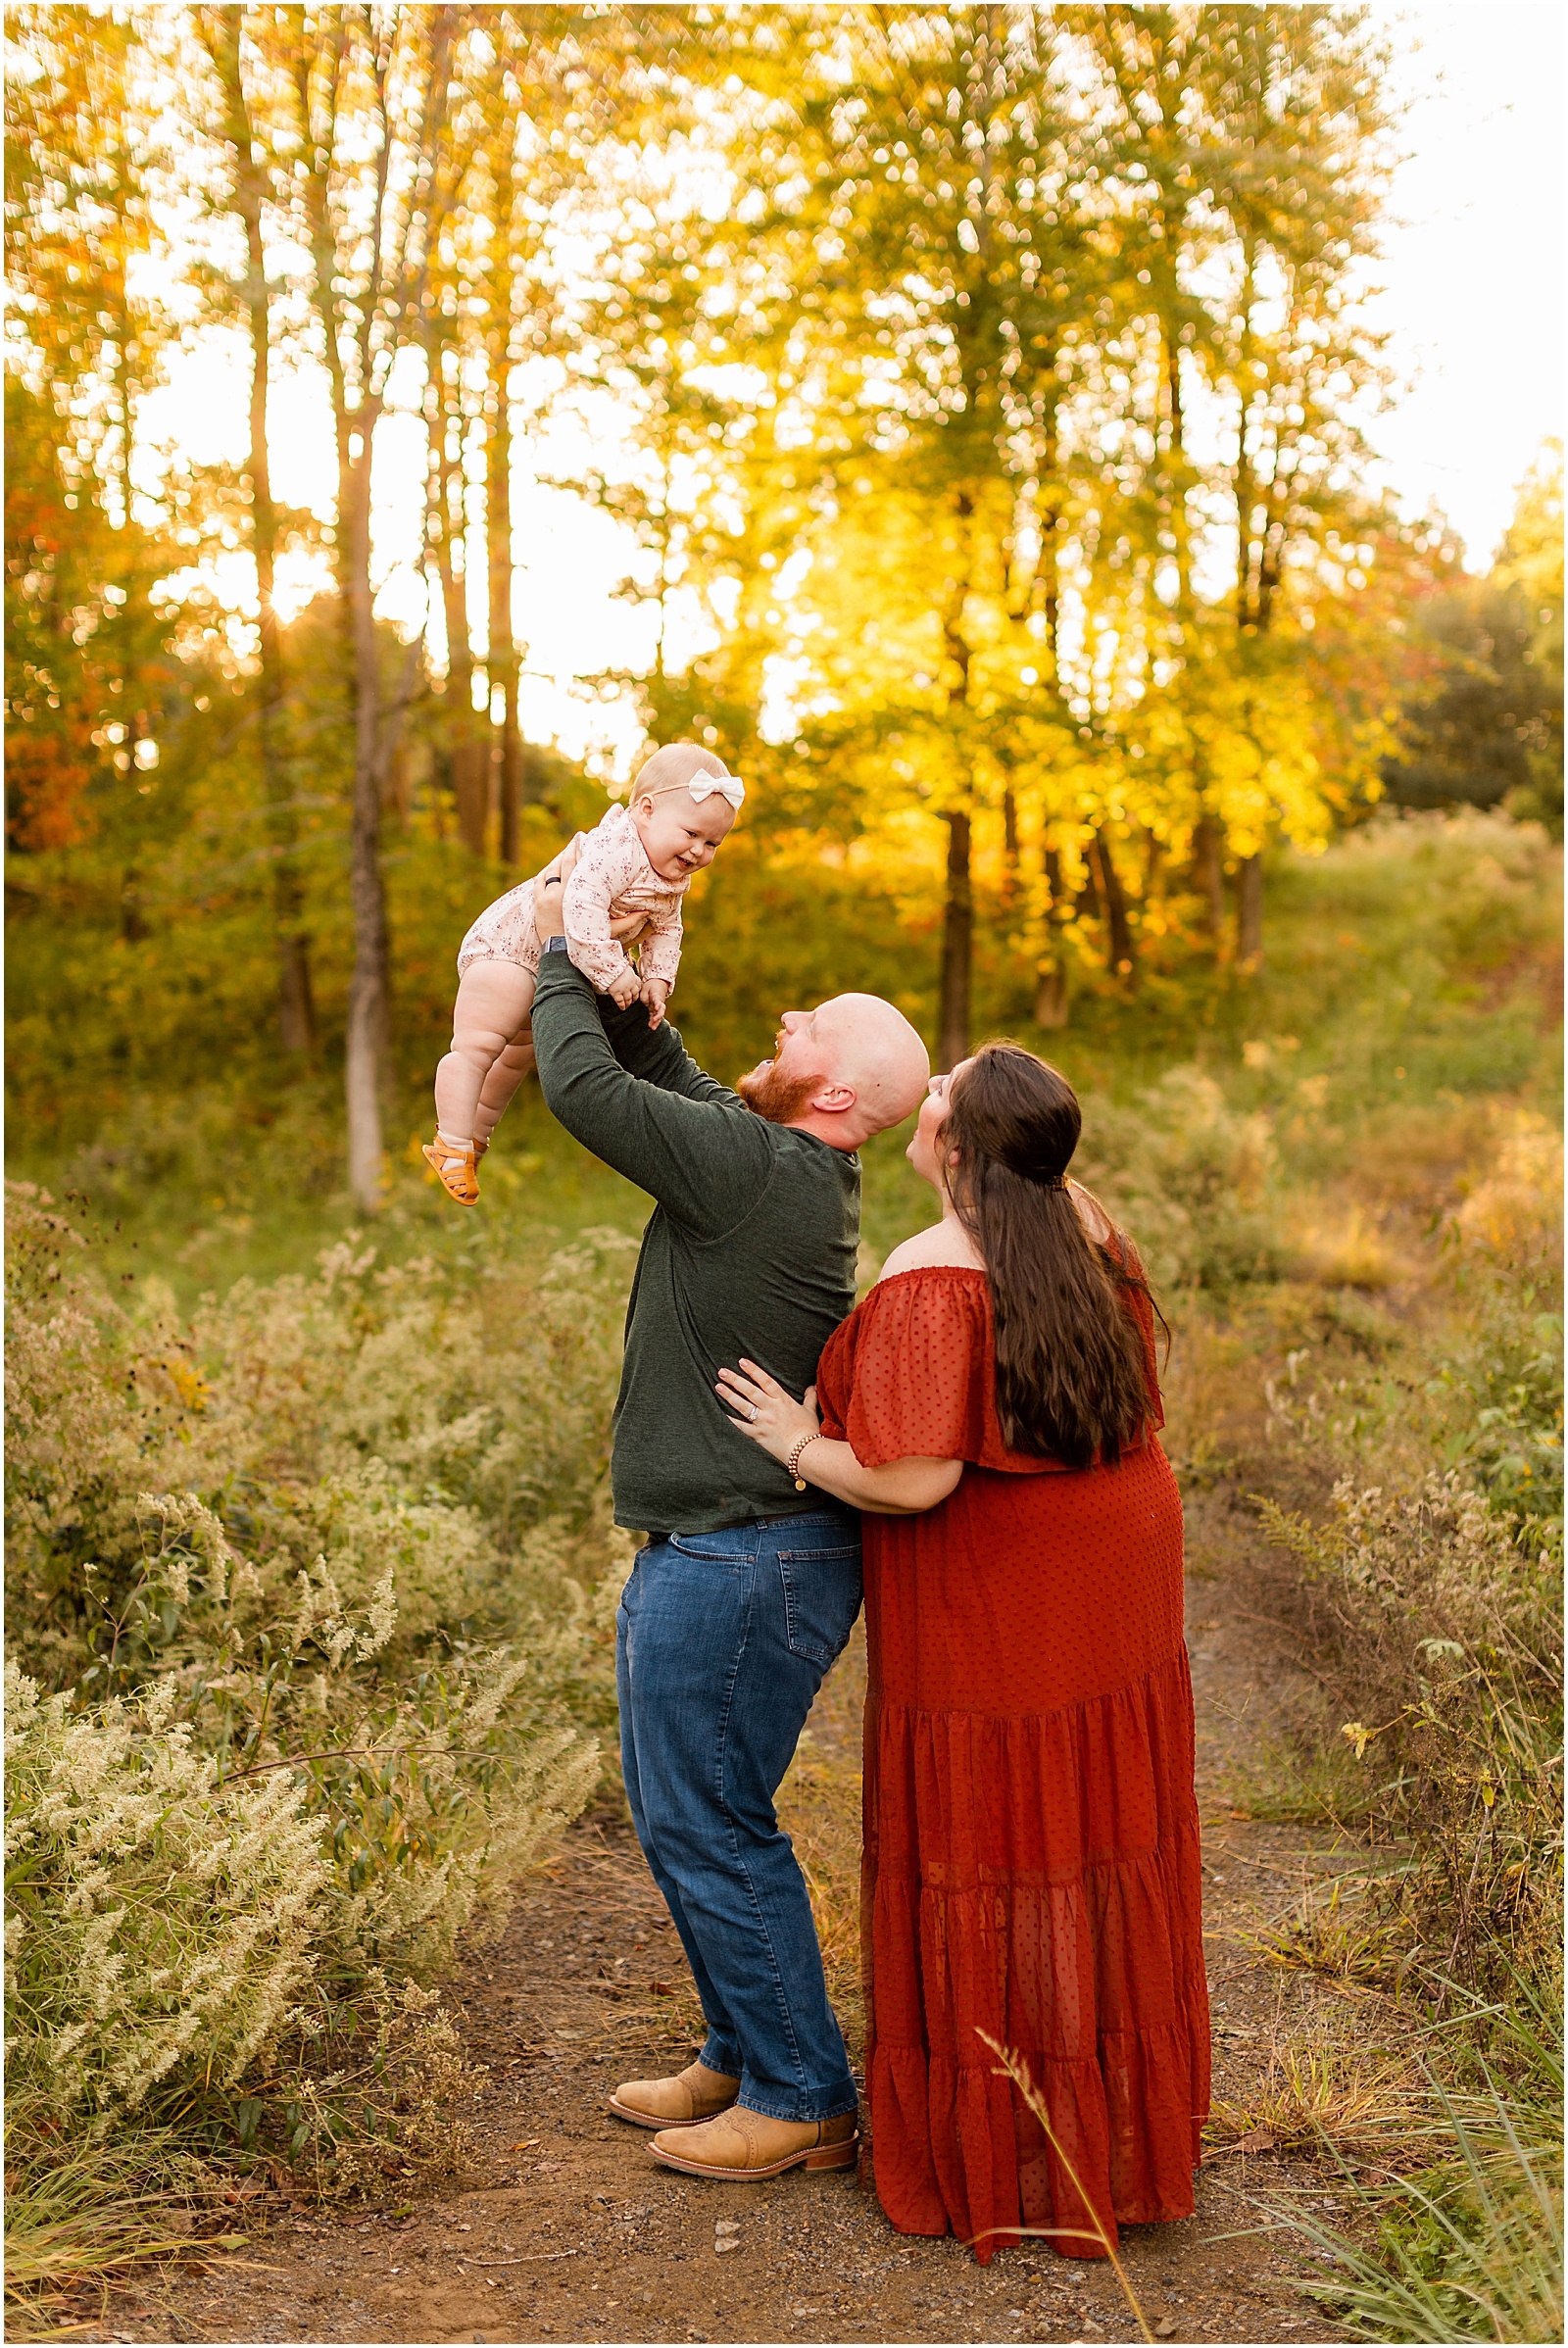 The Peck's Fall Family Session Bret and Brandie Photography | Evansville Indiana Wedding Photographers_0008.jpg